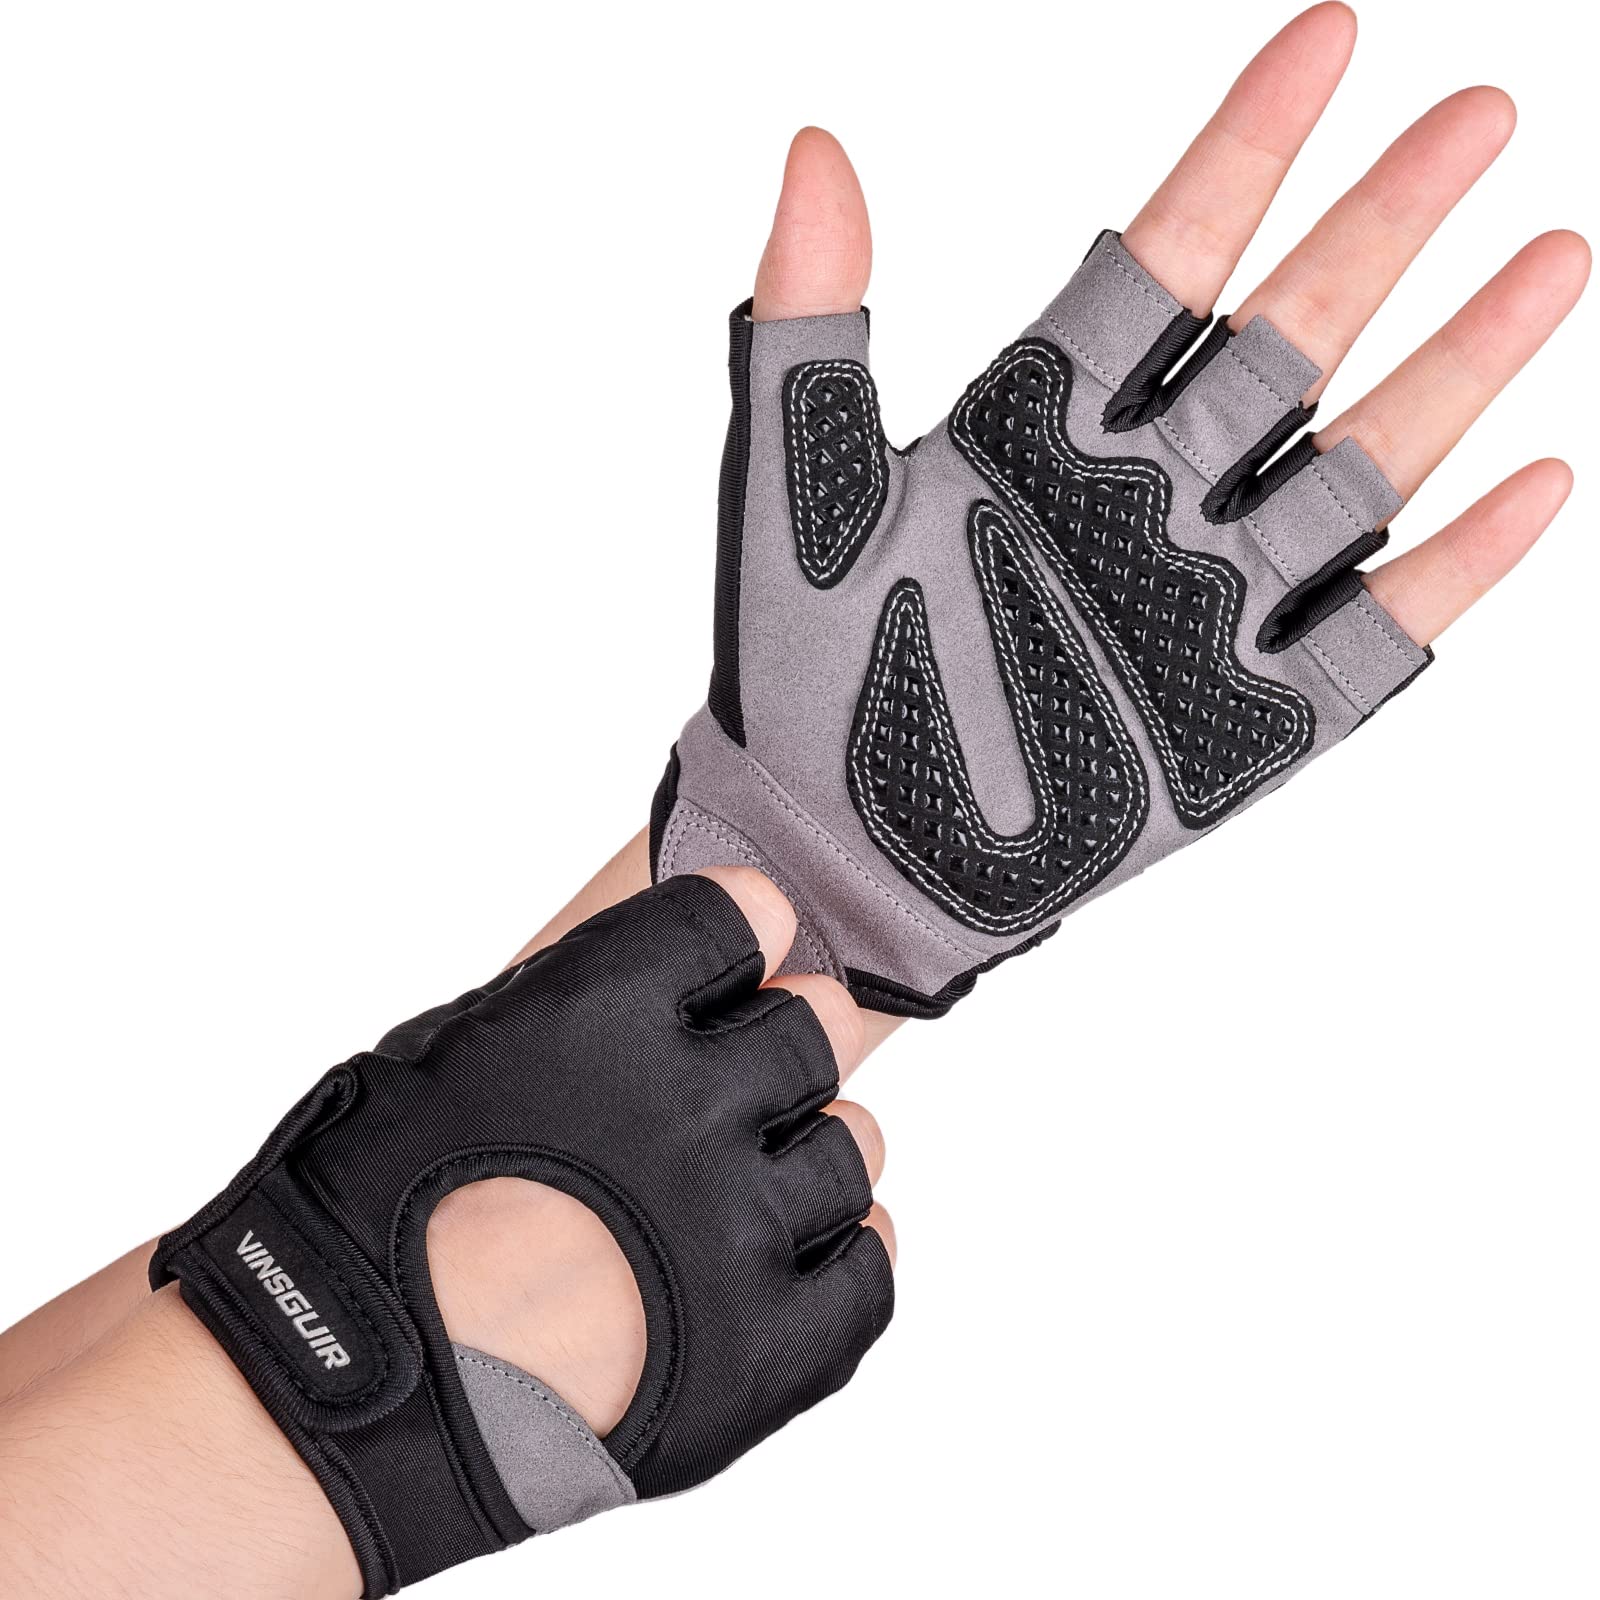  VINSGUIR Breathable Workout Gloves for Women, Weight